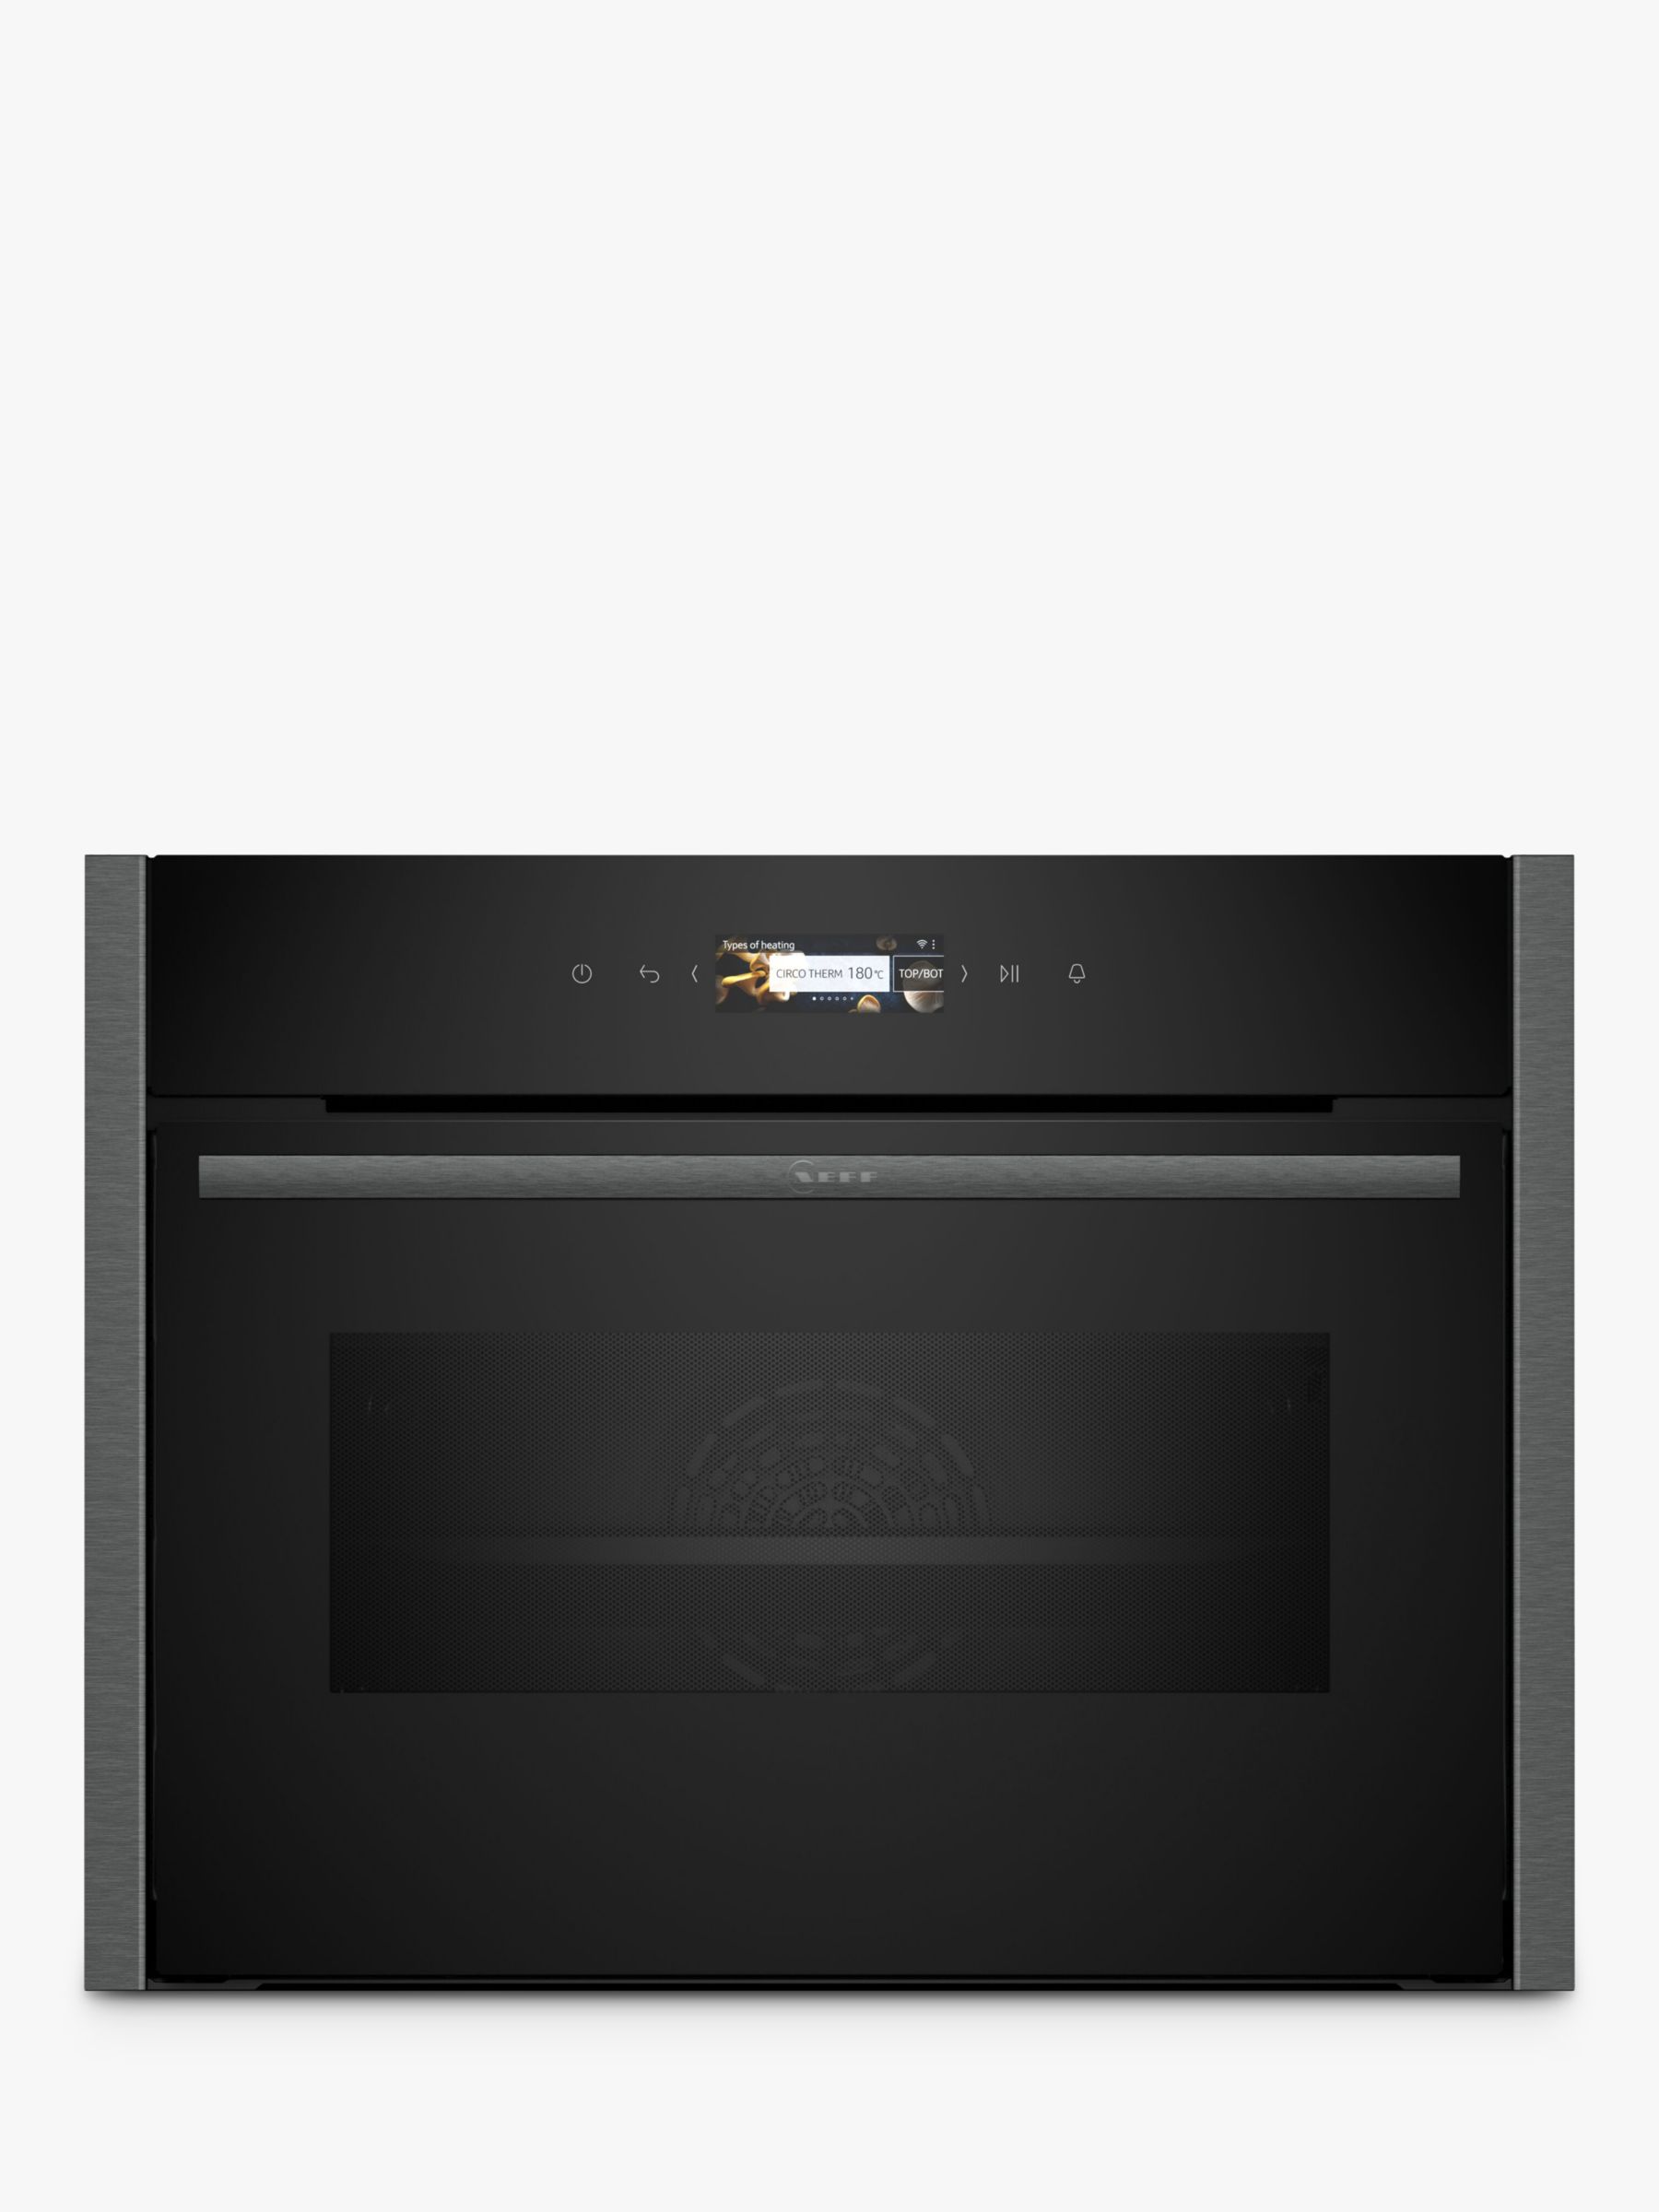 NEFF N70 C24MR21G0B Built-in Compact Oven with Microwave Function, Grey Graphite